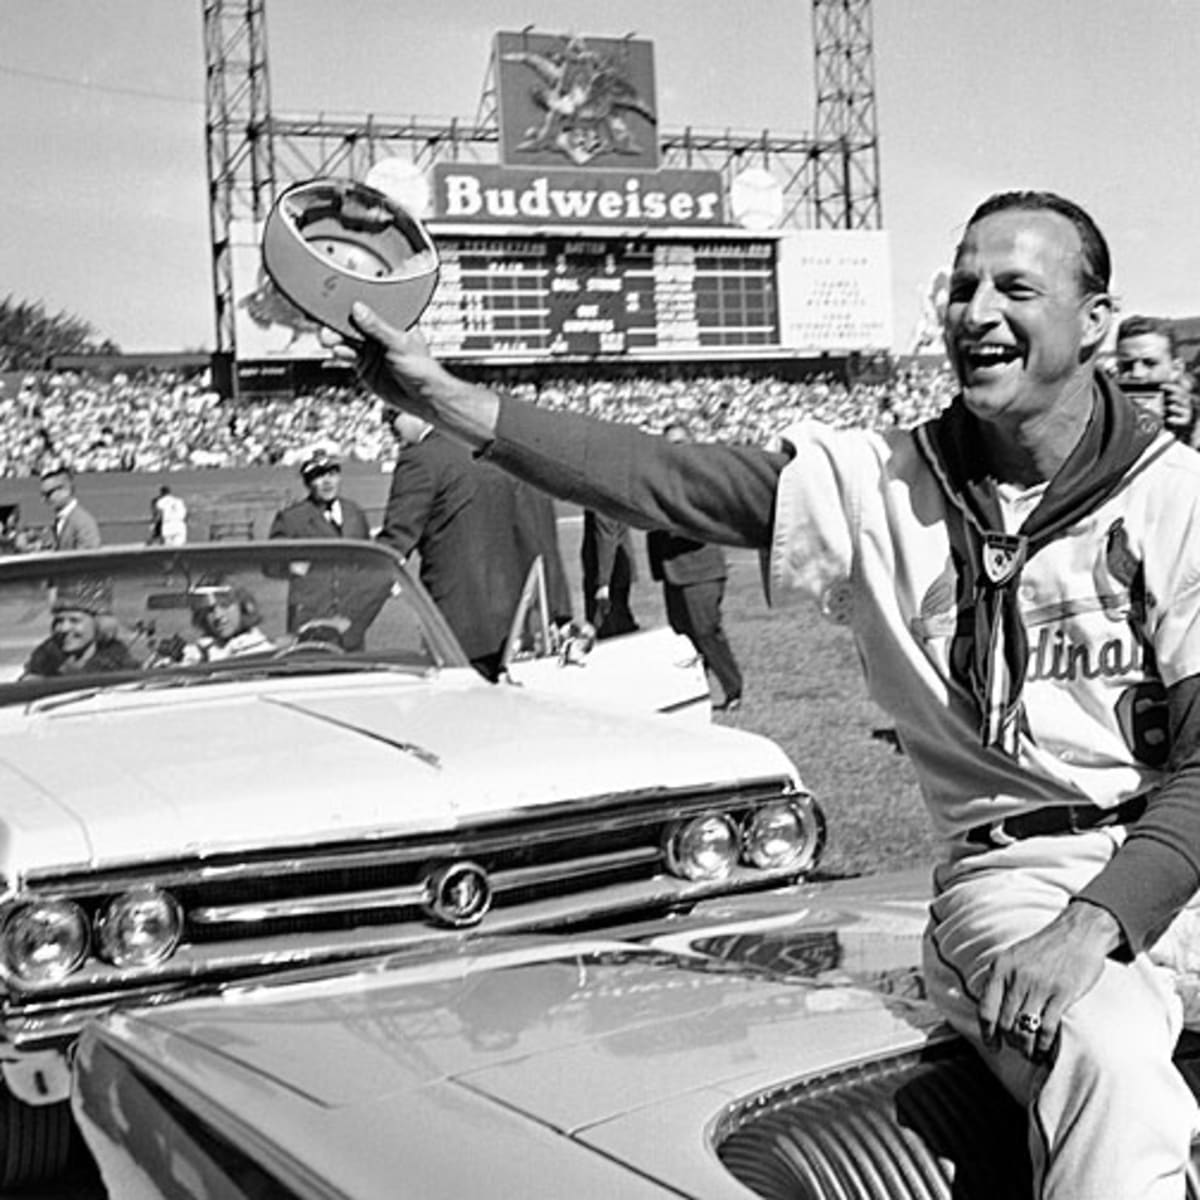 Cardinals legend Stan Musial dead at 92 - Sports Illustrated